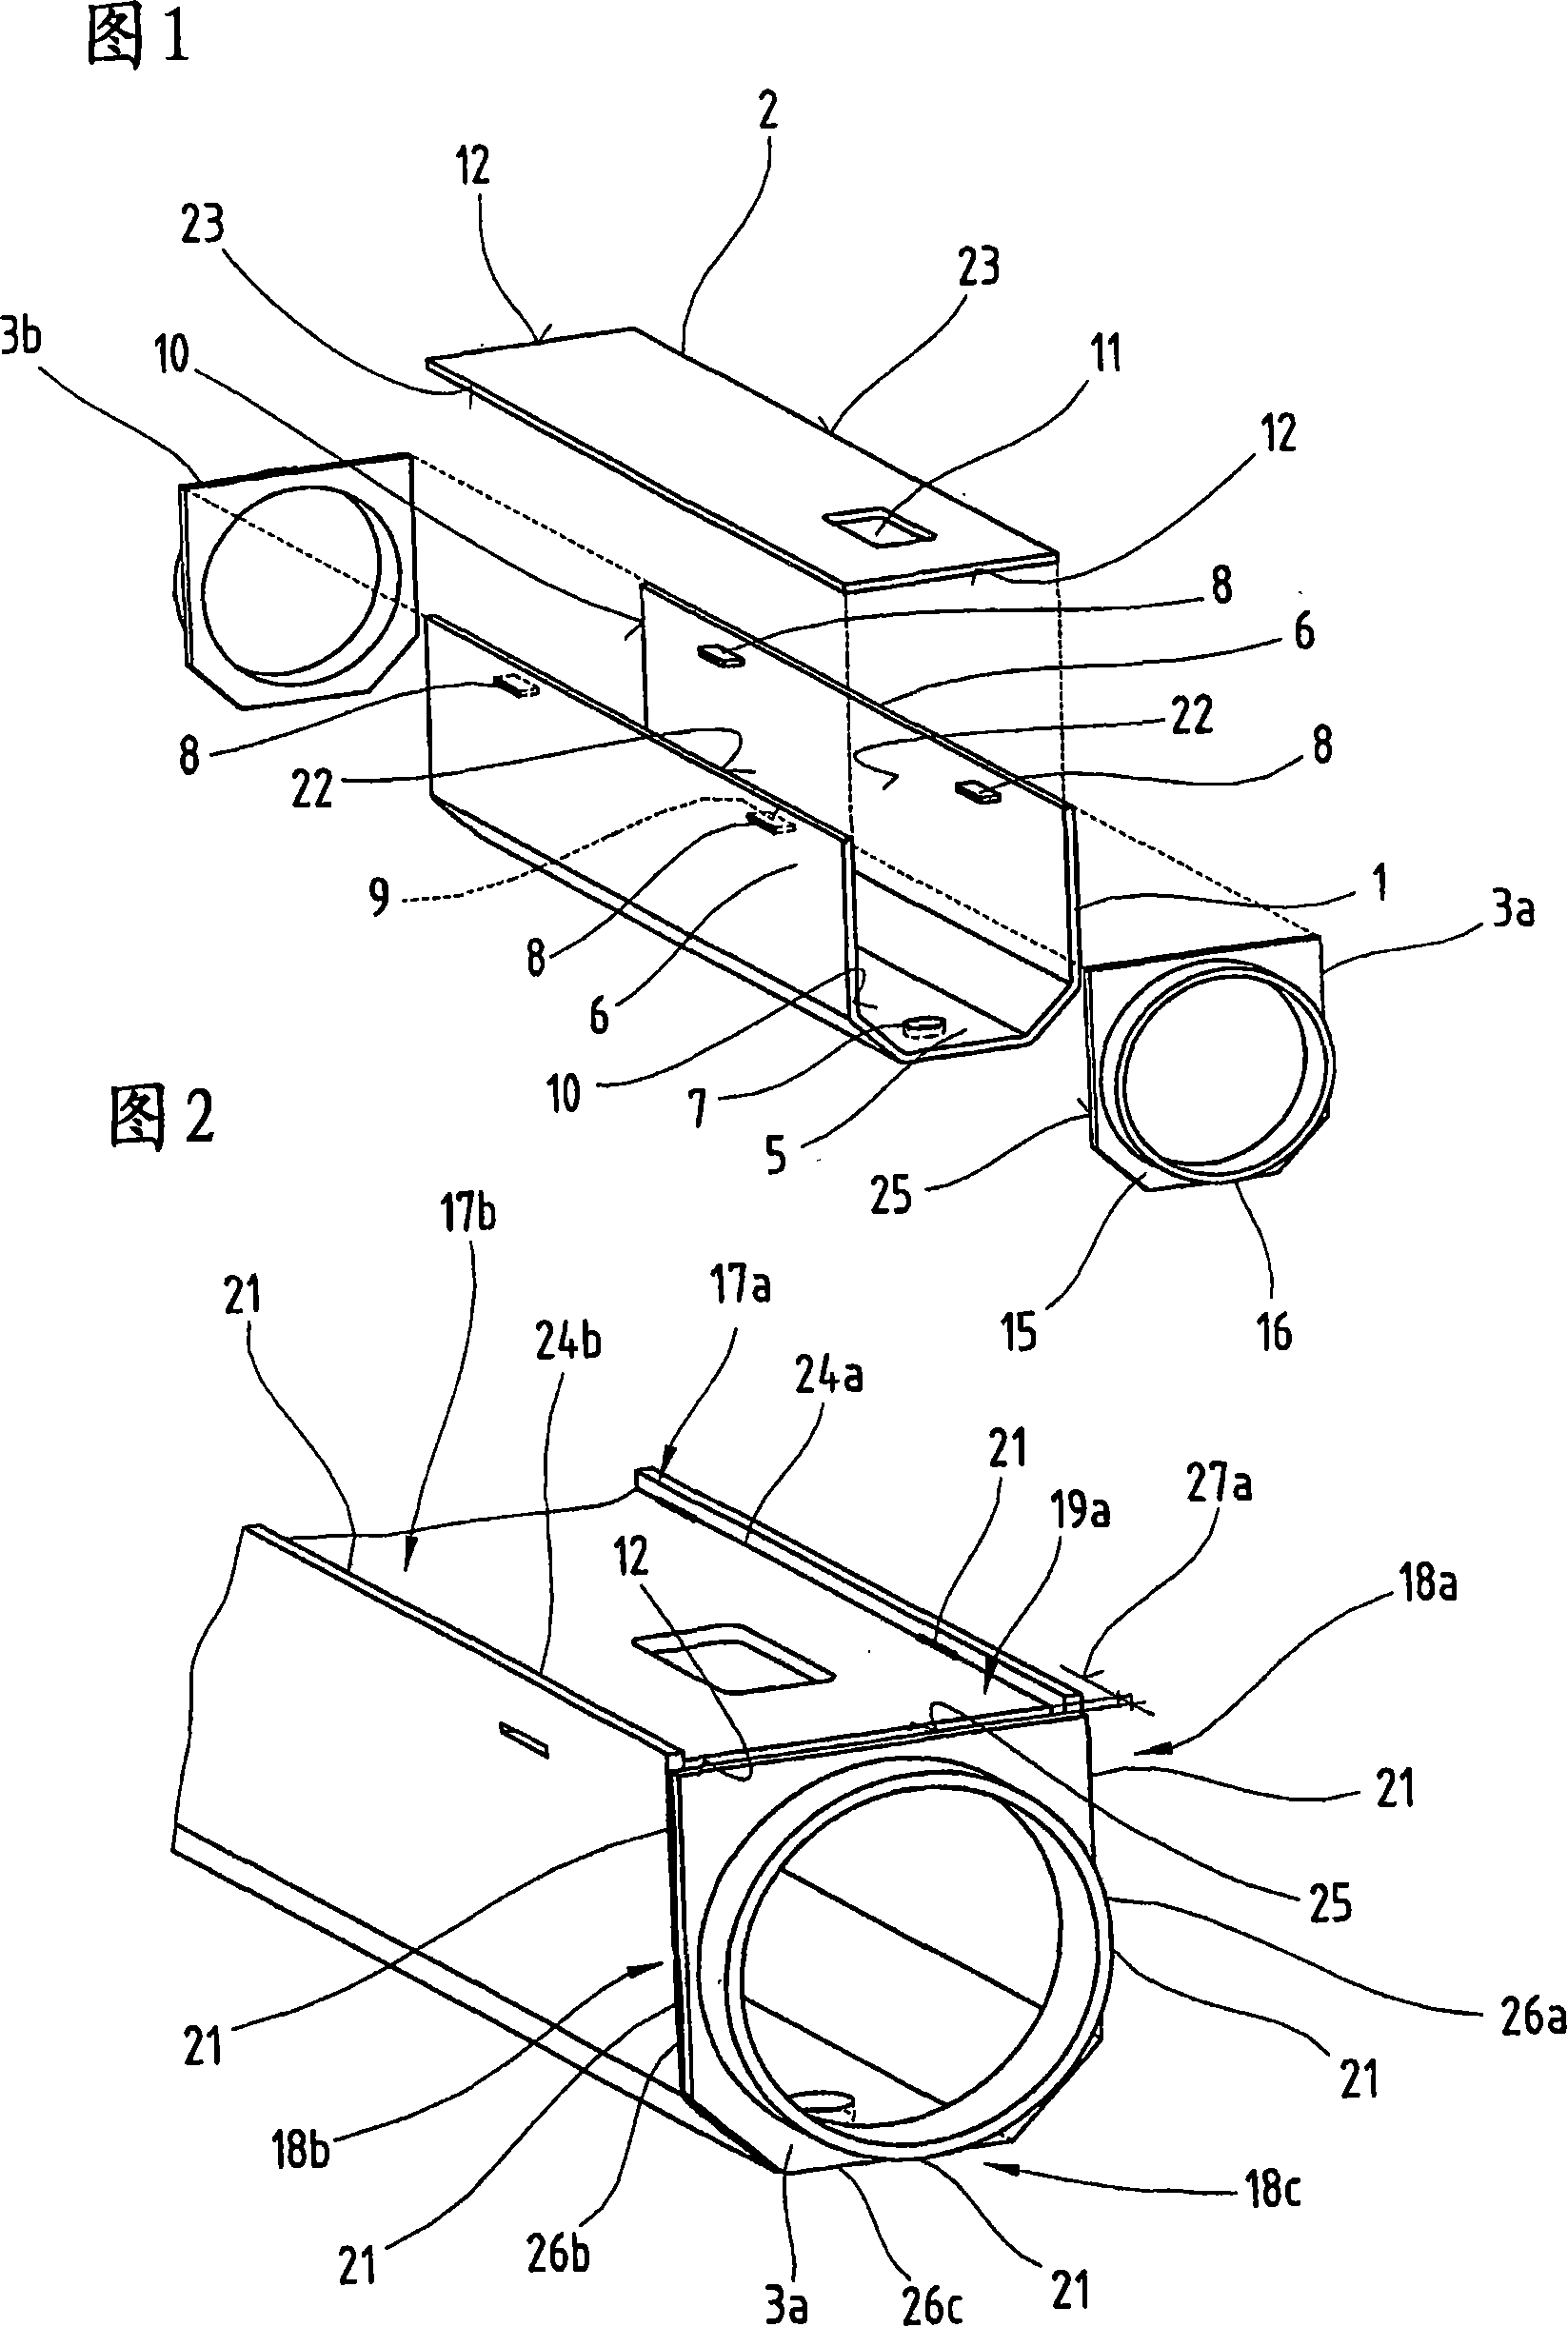 Installation for producing and method for assembling parts